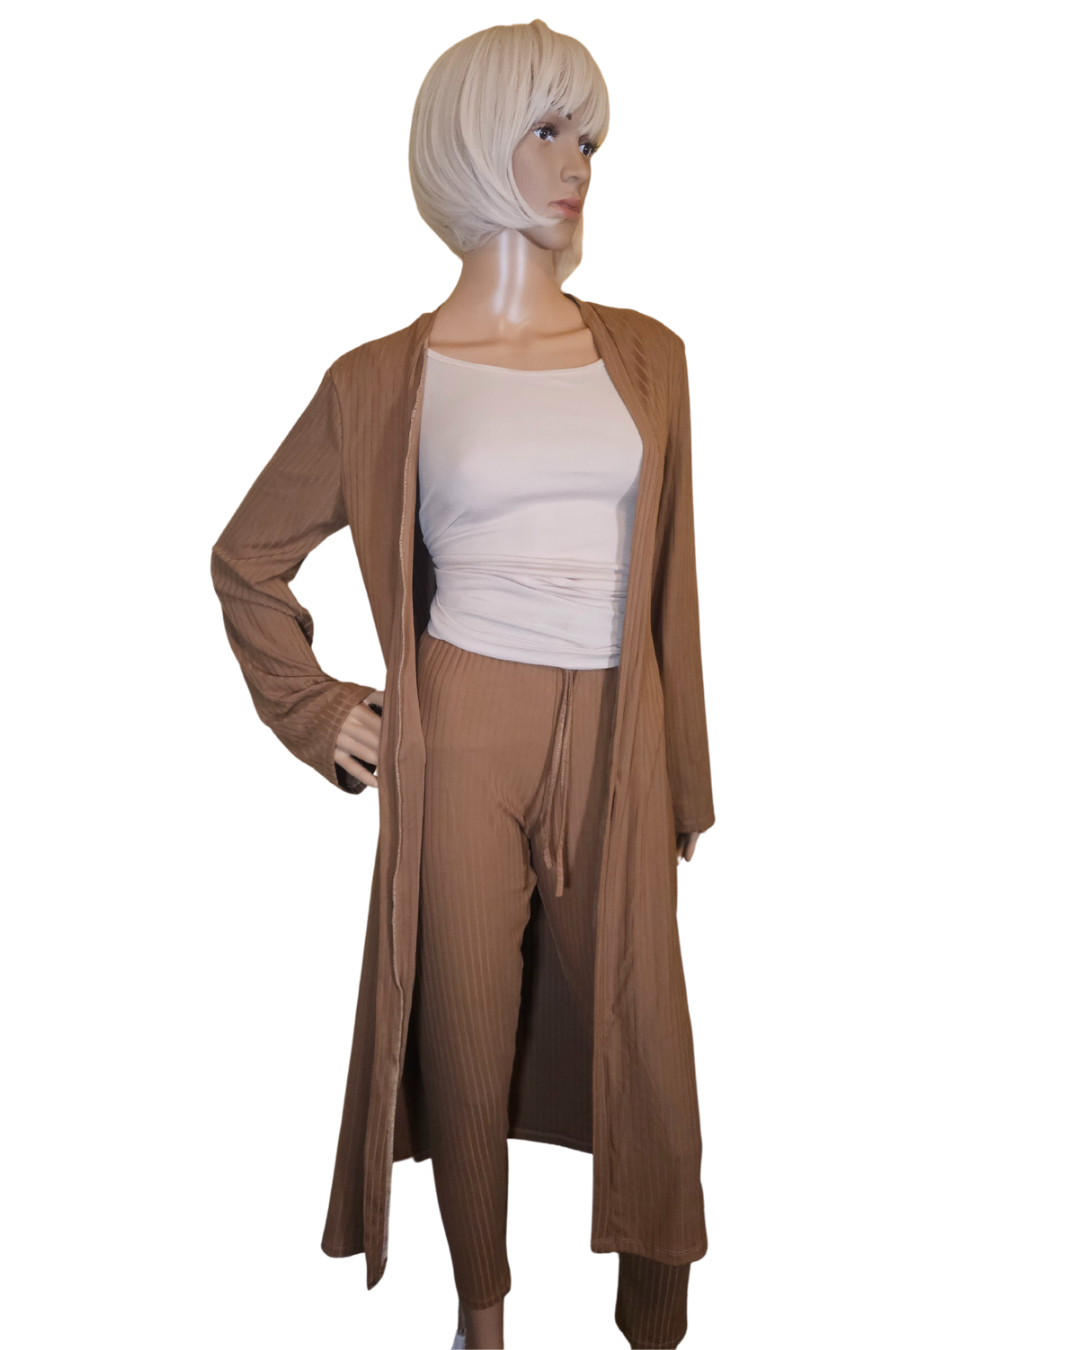 Small-Large in size. tan 2 pc cardigan set. the pants are legging pants with a decorative string in the front.